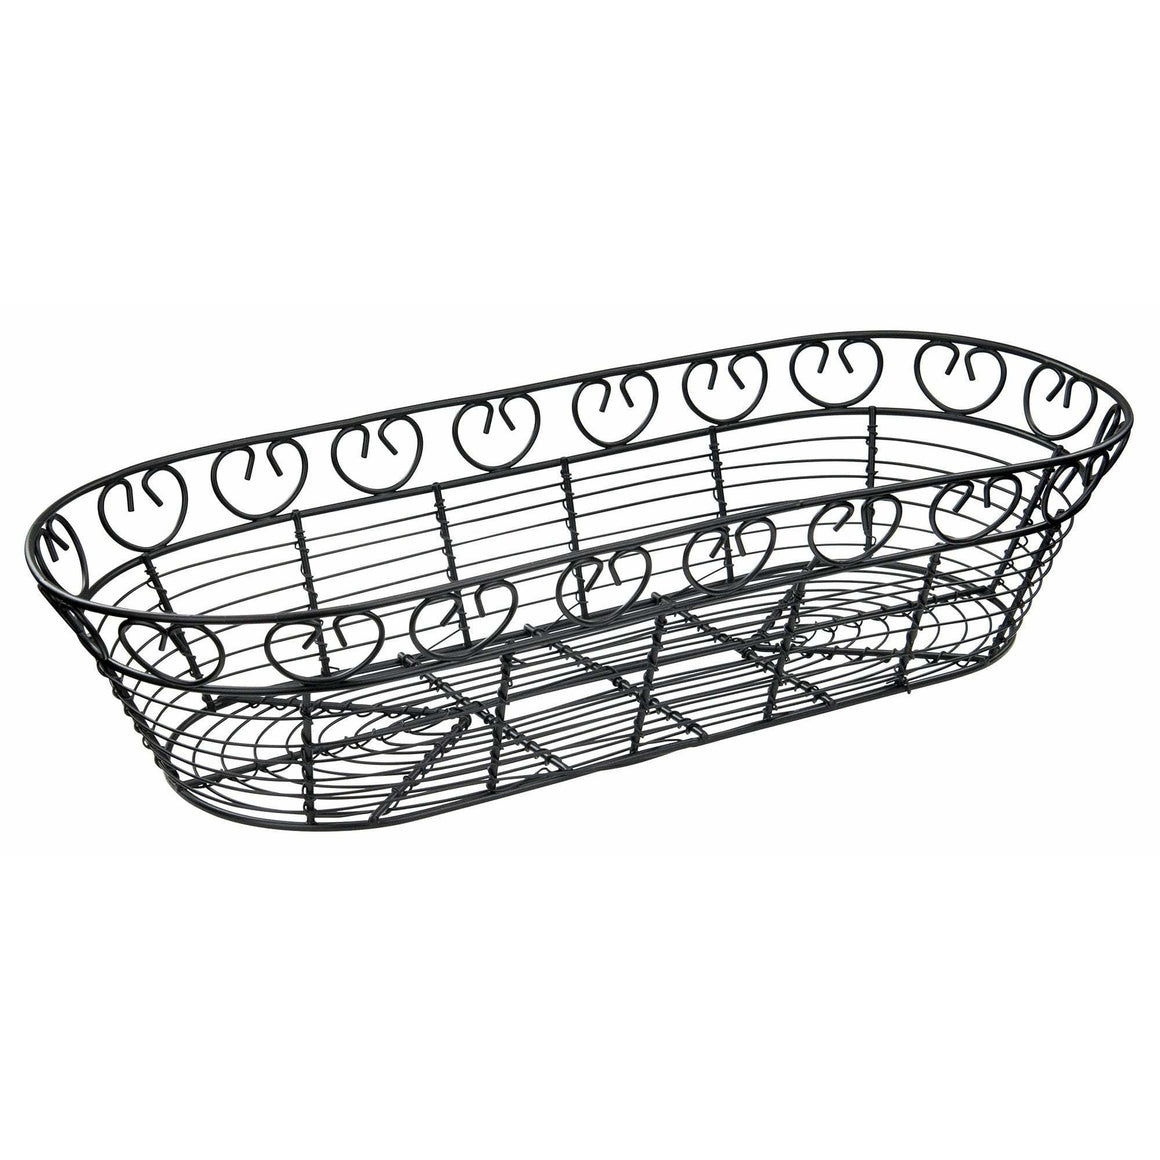 Winco - WBKG-15 - Bread/Fruit Basket, Black Wire, Oval, 15" x 6-1/4" x 3" - Tabletop - Maltese & Co New and Used  restaurant Equipment 